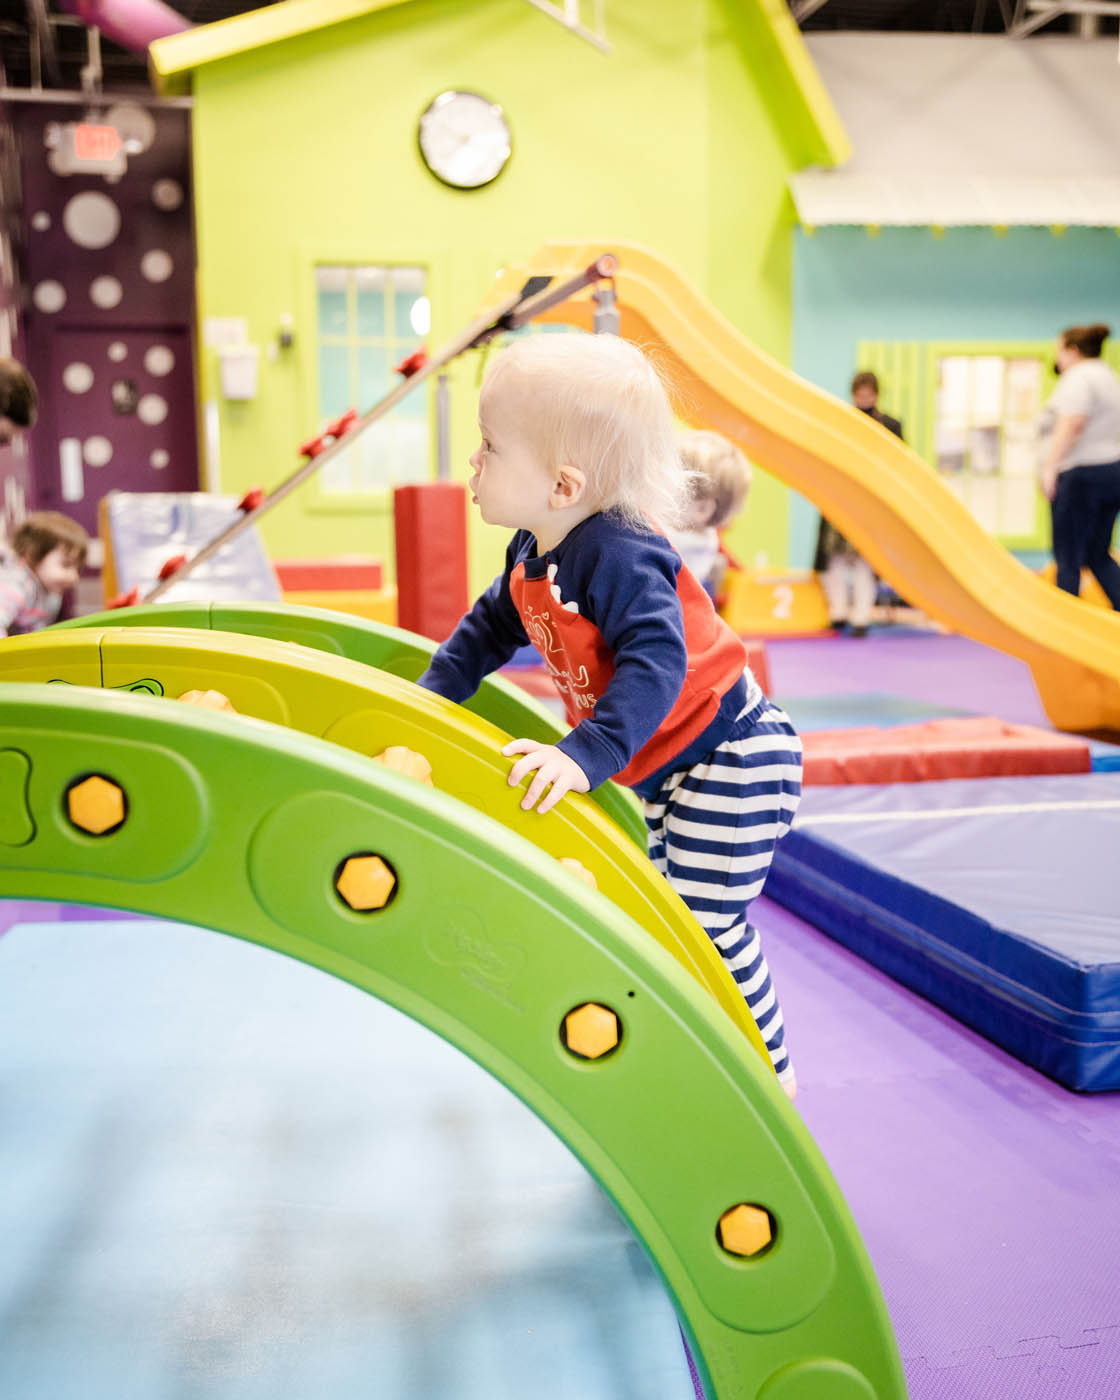 A little bloy playing on Romp n' Roll's indoor playground in Midlothian, VA.